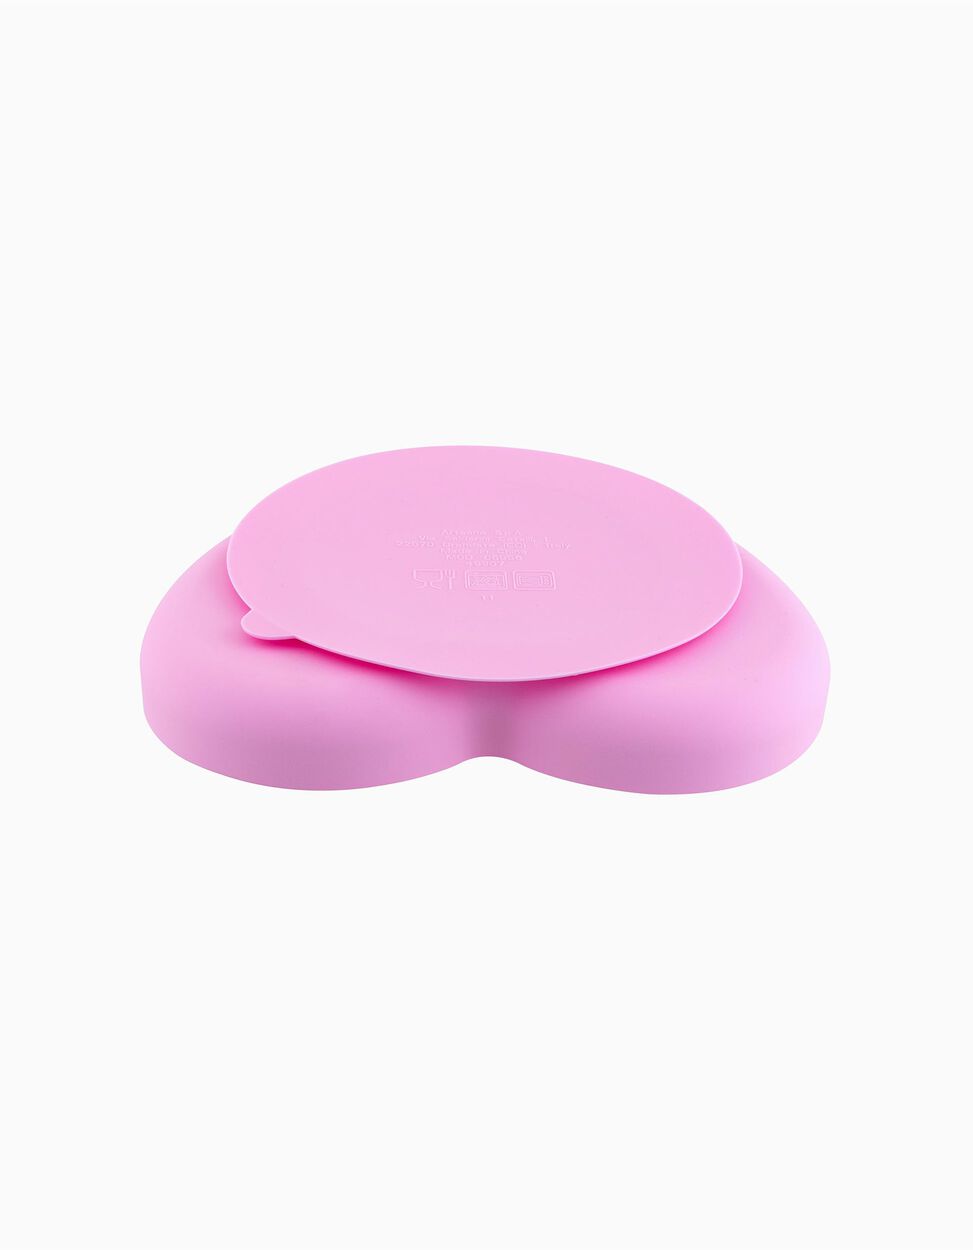 Silicone Plate, Eat Easy by Chicco, Heart, Pink